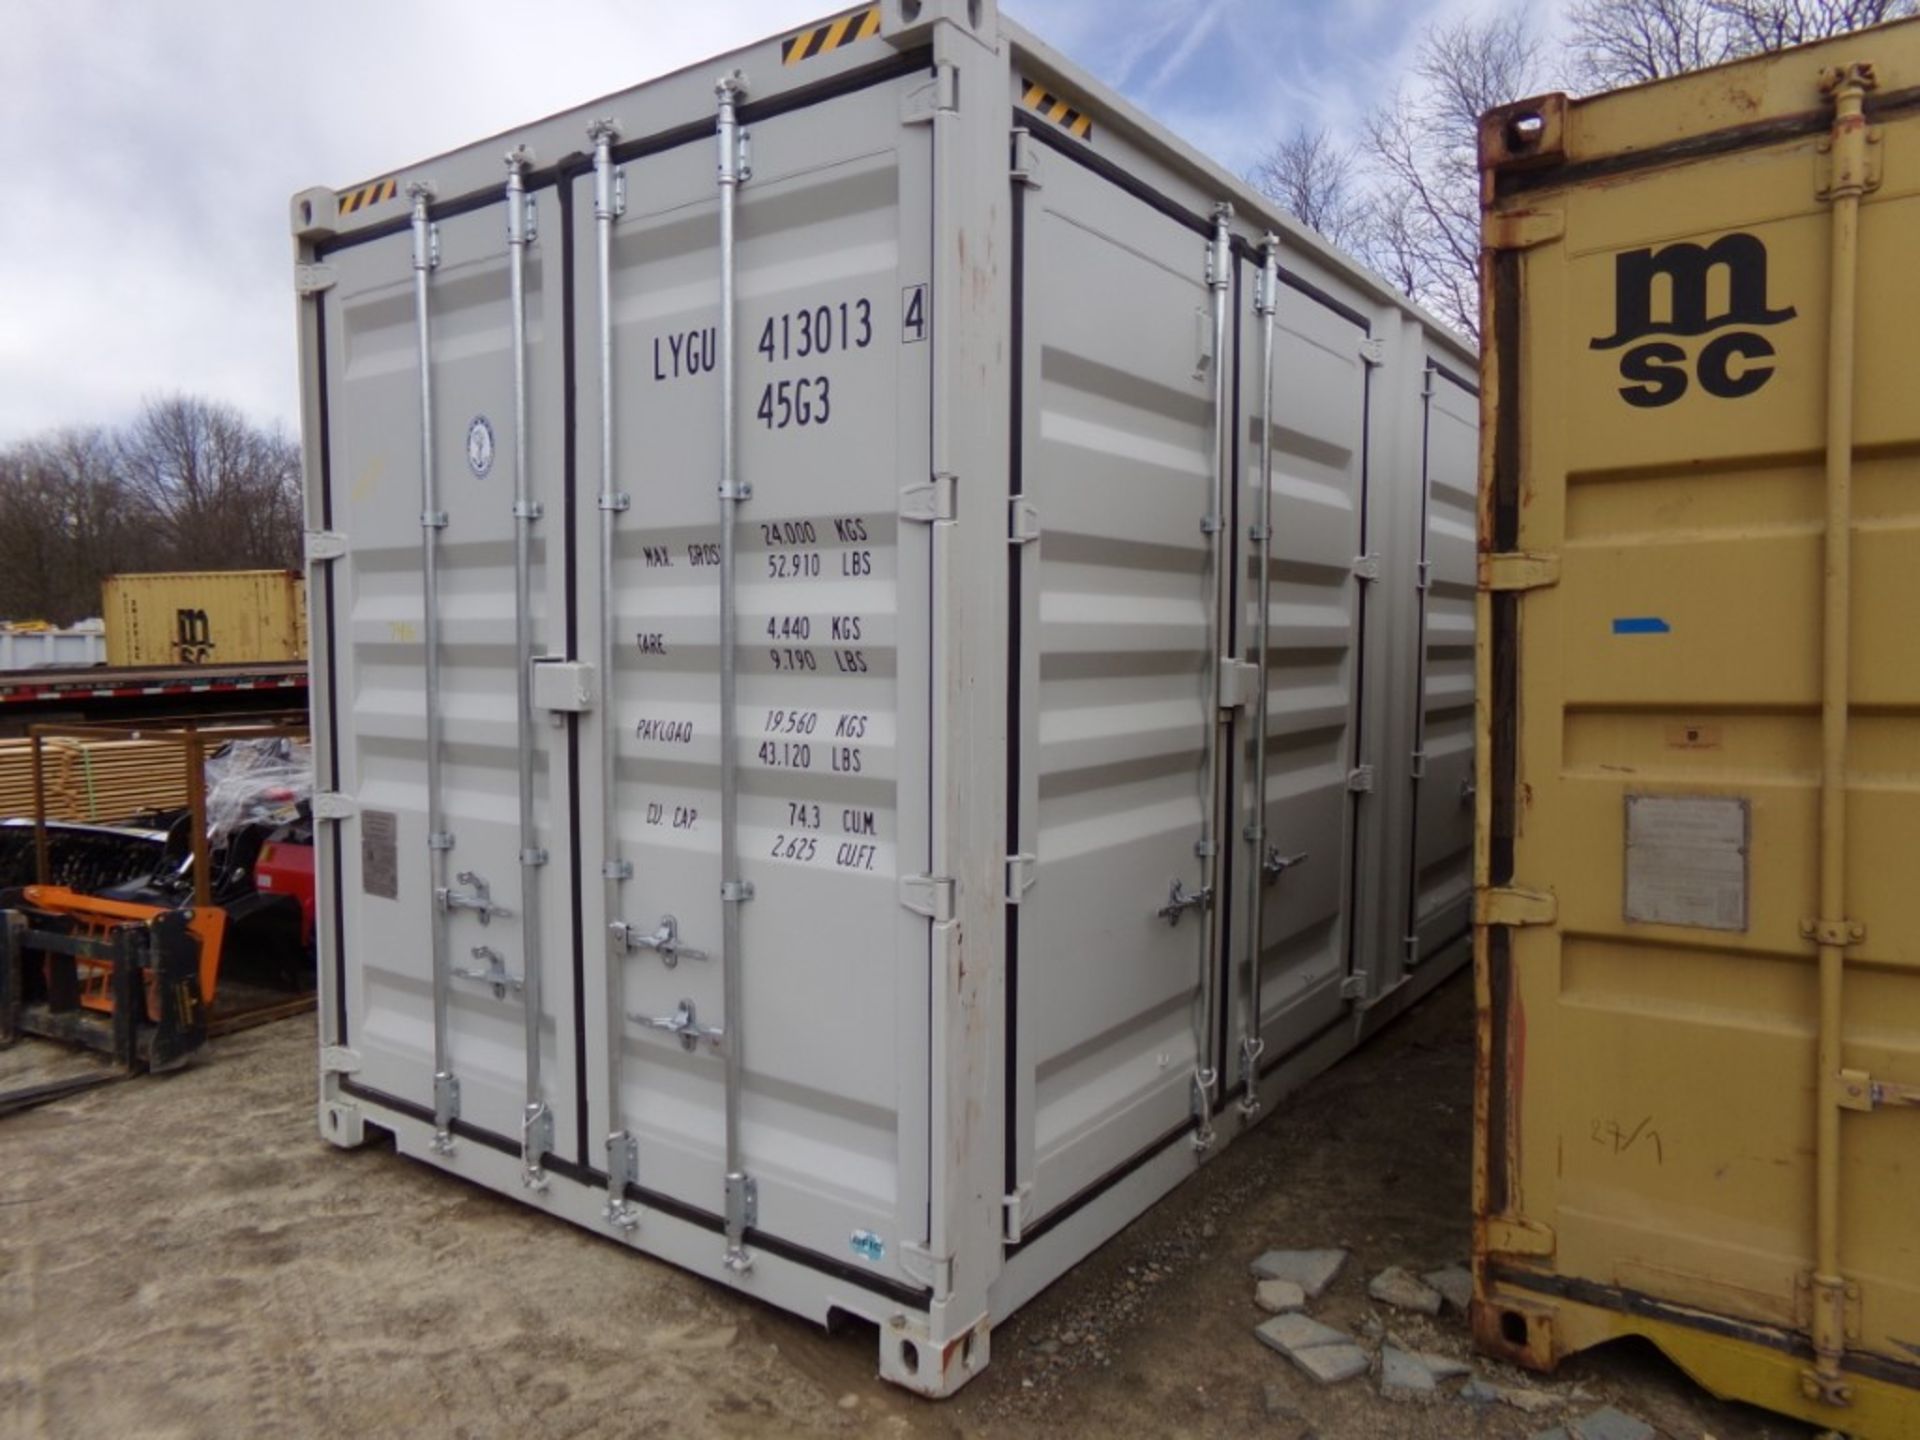 New 40' Off White Storage Container with Barn Doors in 1 End, Cont. # LYGU4130134